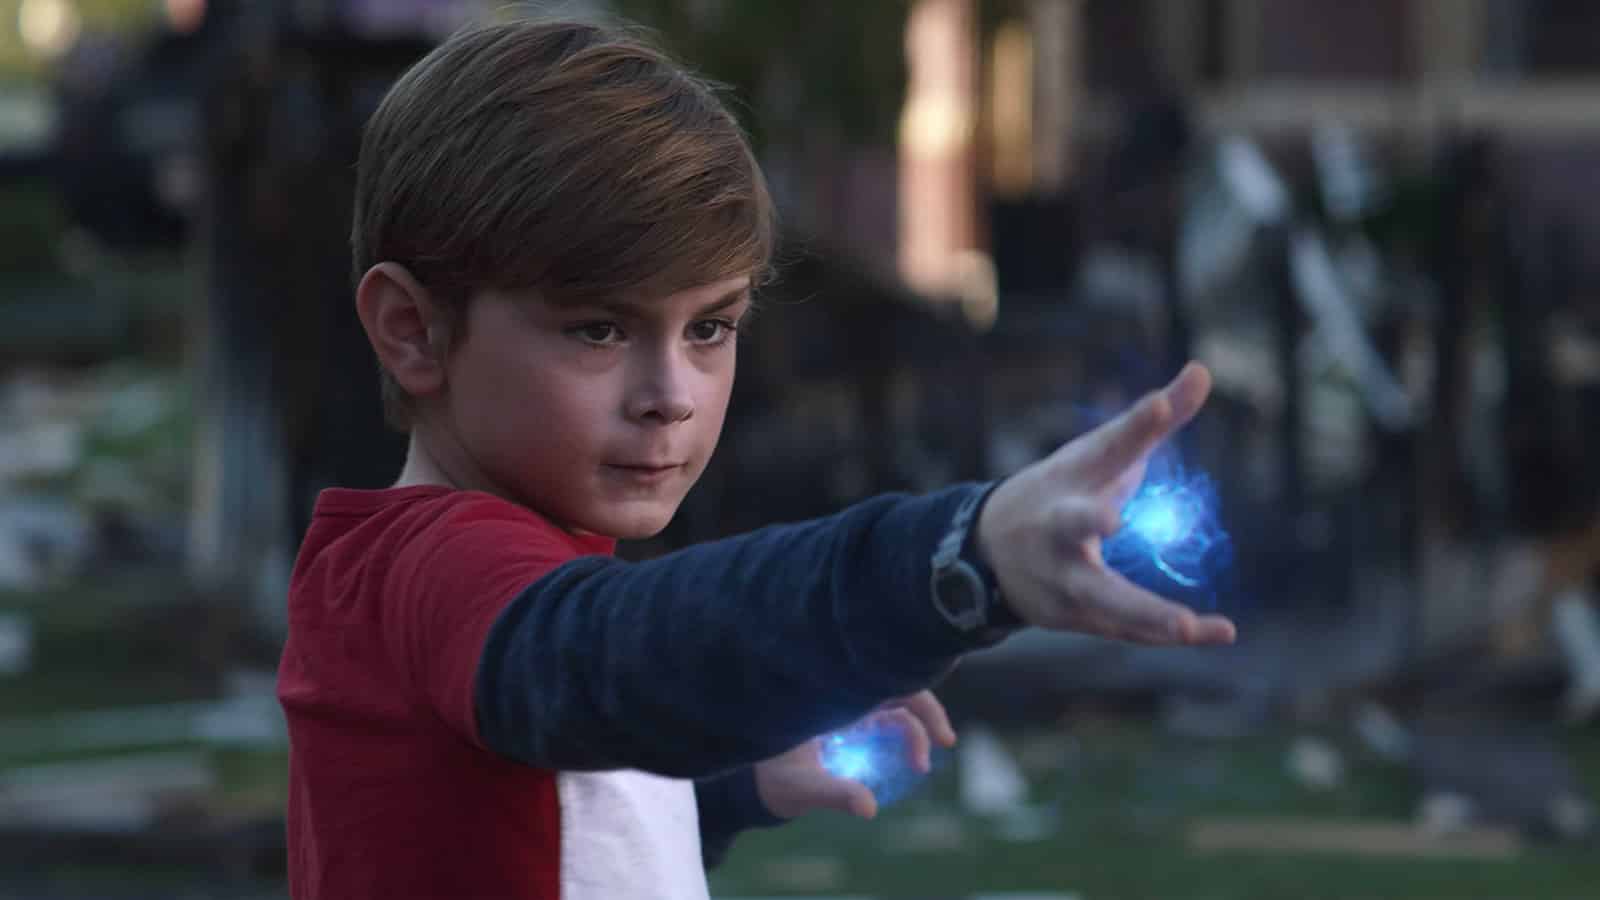 Wiccan appearing in the MCU